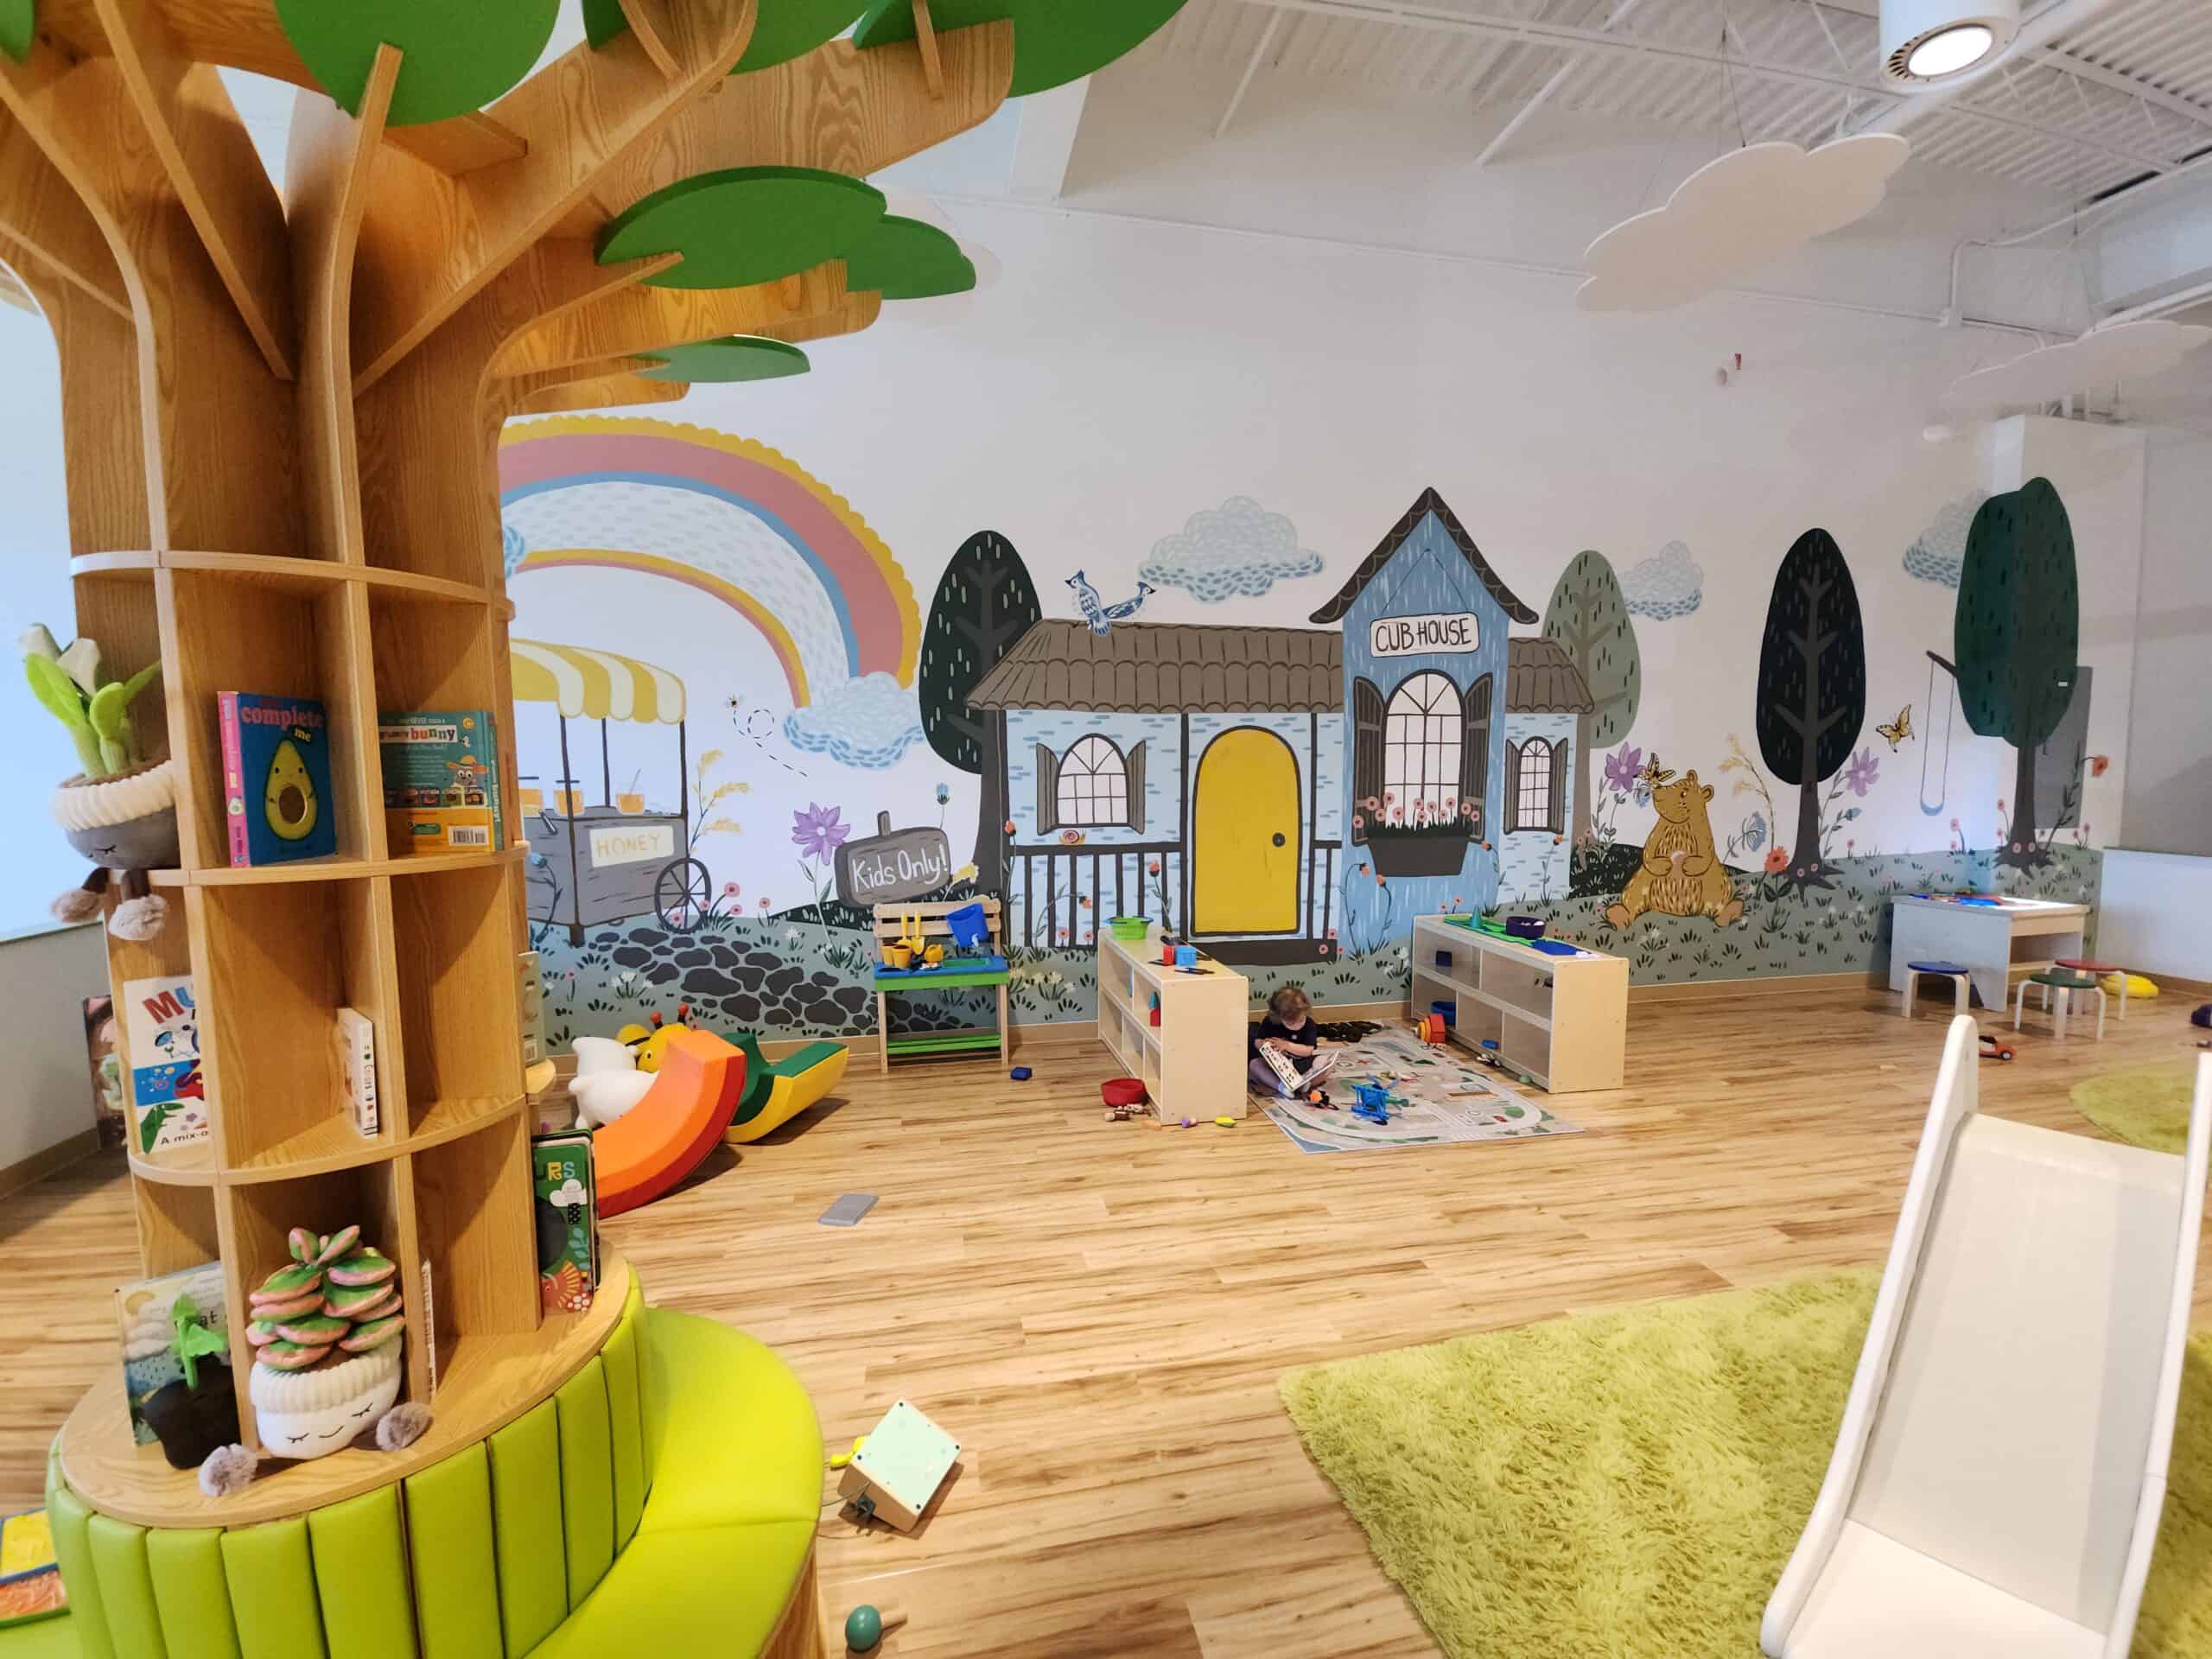 A colorful indoor playground features a whimsical mural of a clubhouse and a honey cart, with a tree bookshelf stocked with children's books. There is a play area with toys scattered on the floor, a small slide, and bright green rugs, creating a playful and inviting atmosphere for kids in Clayton, NC.